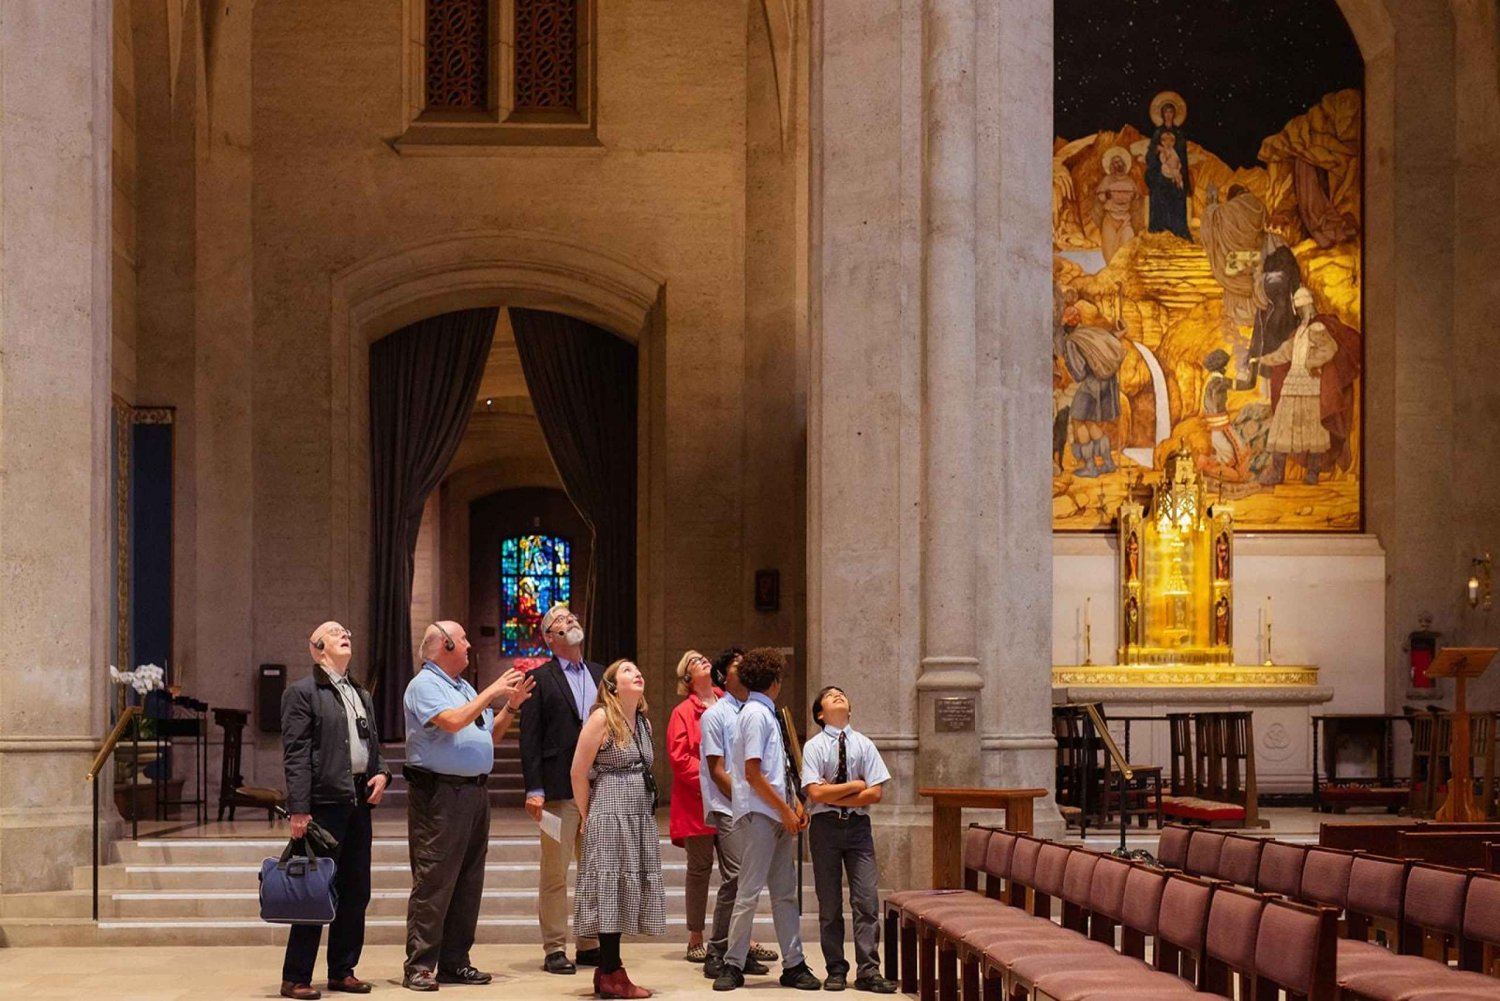 Guided Tour: Experience the Wonder of Grace Cathedral